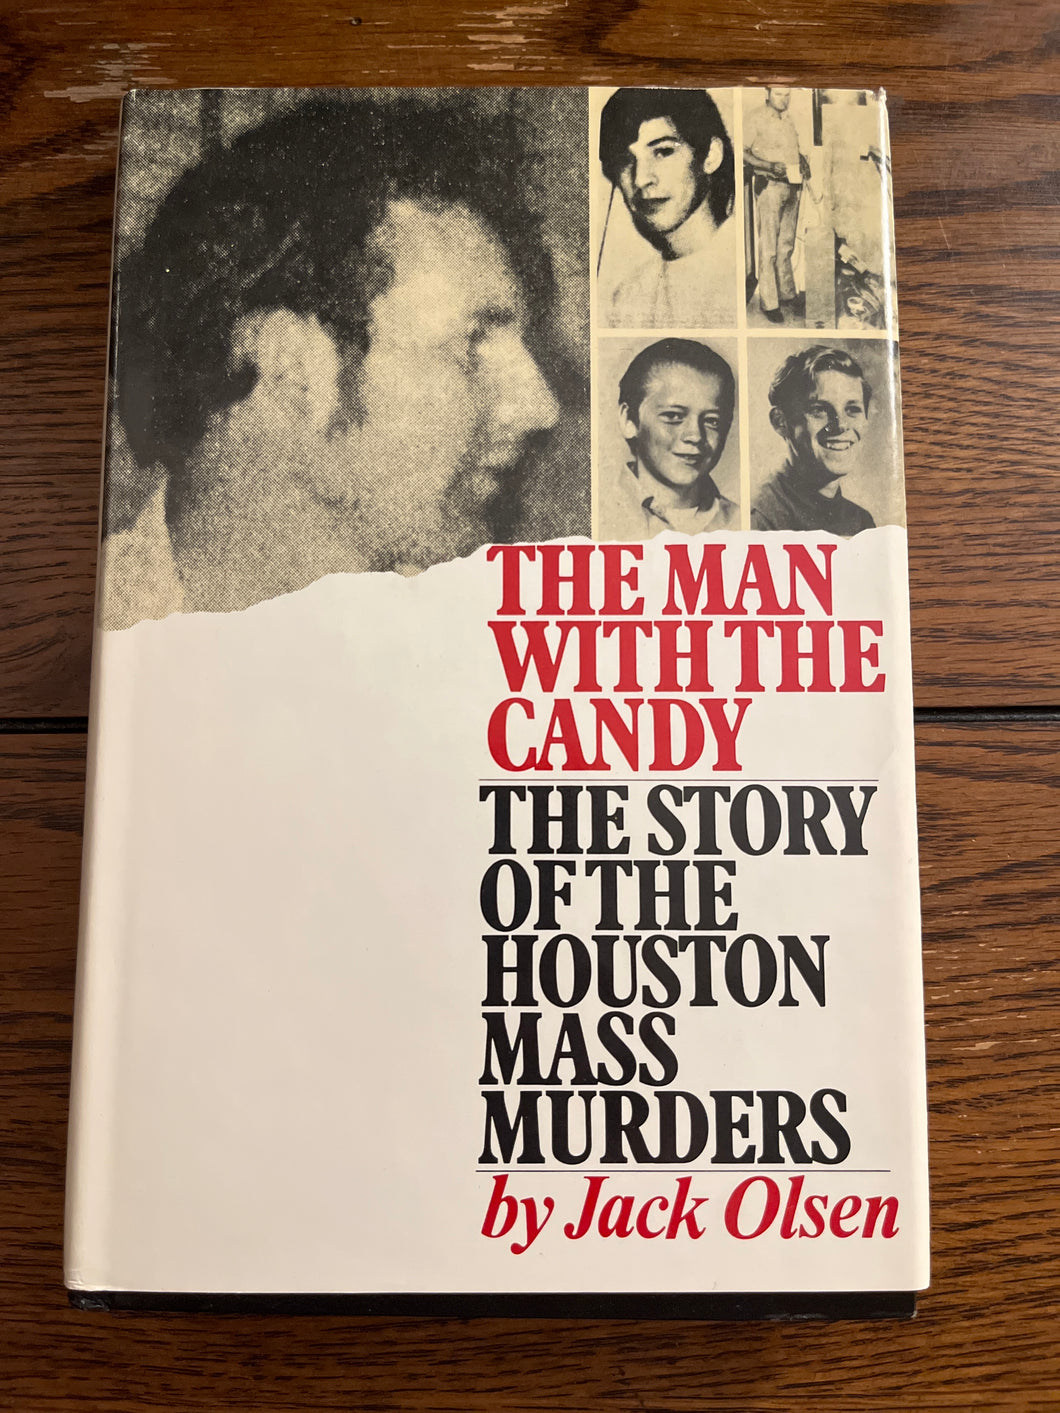 The Man With The Candy: The Story Of The Houston Mass Murders